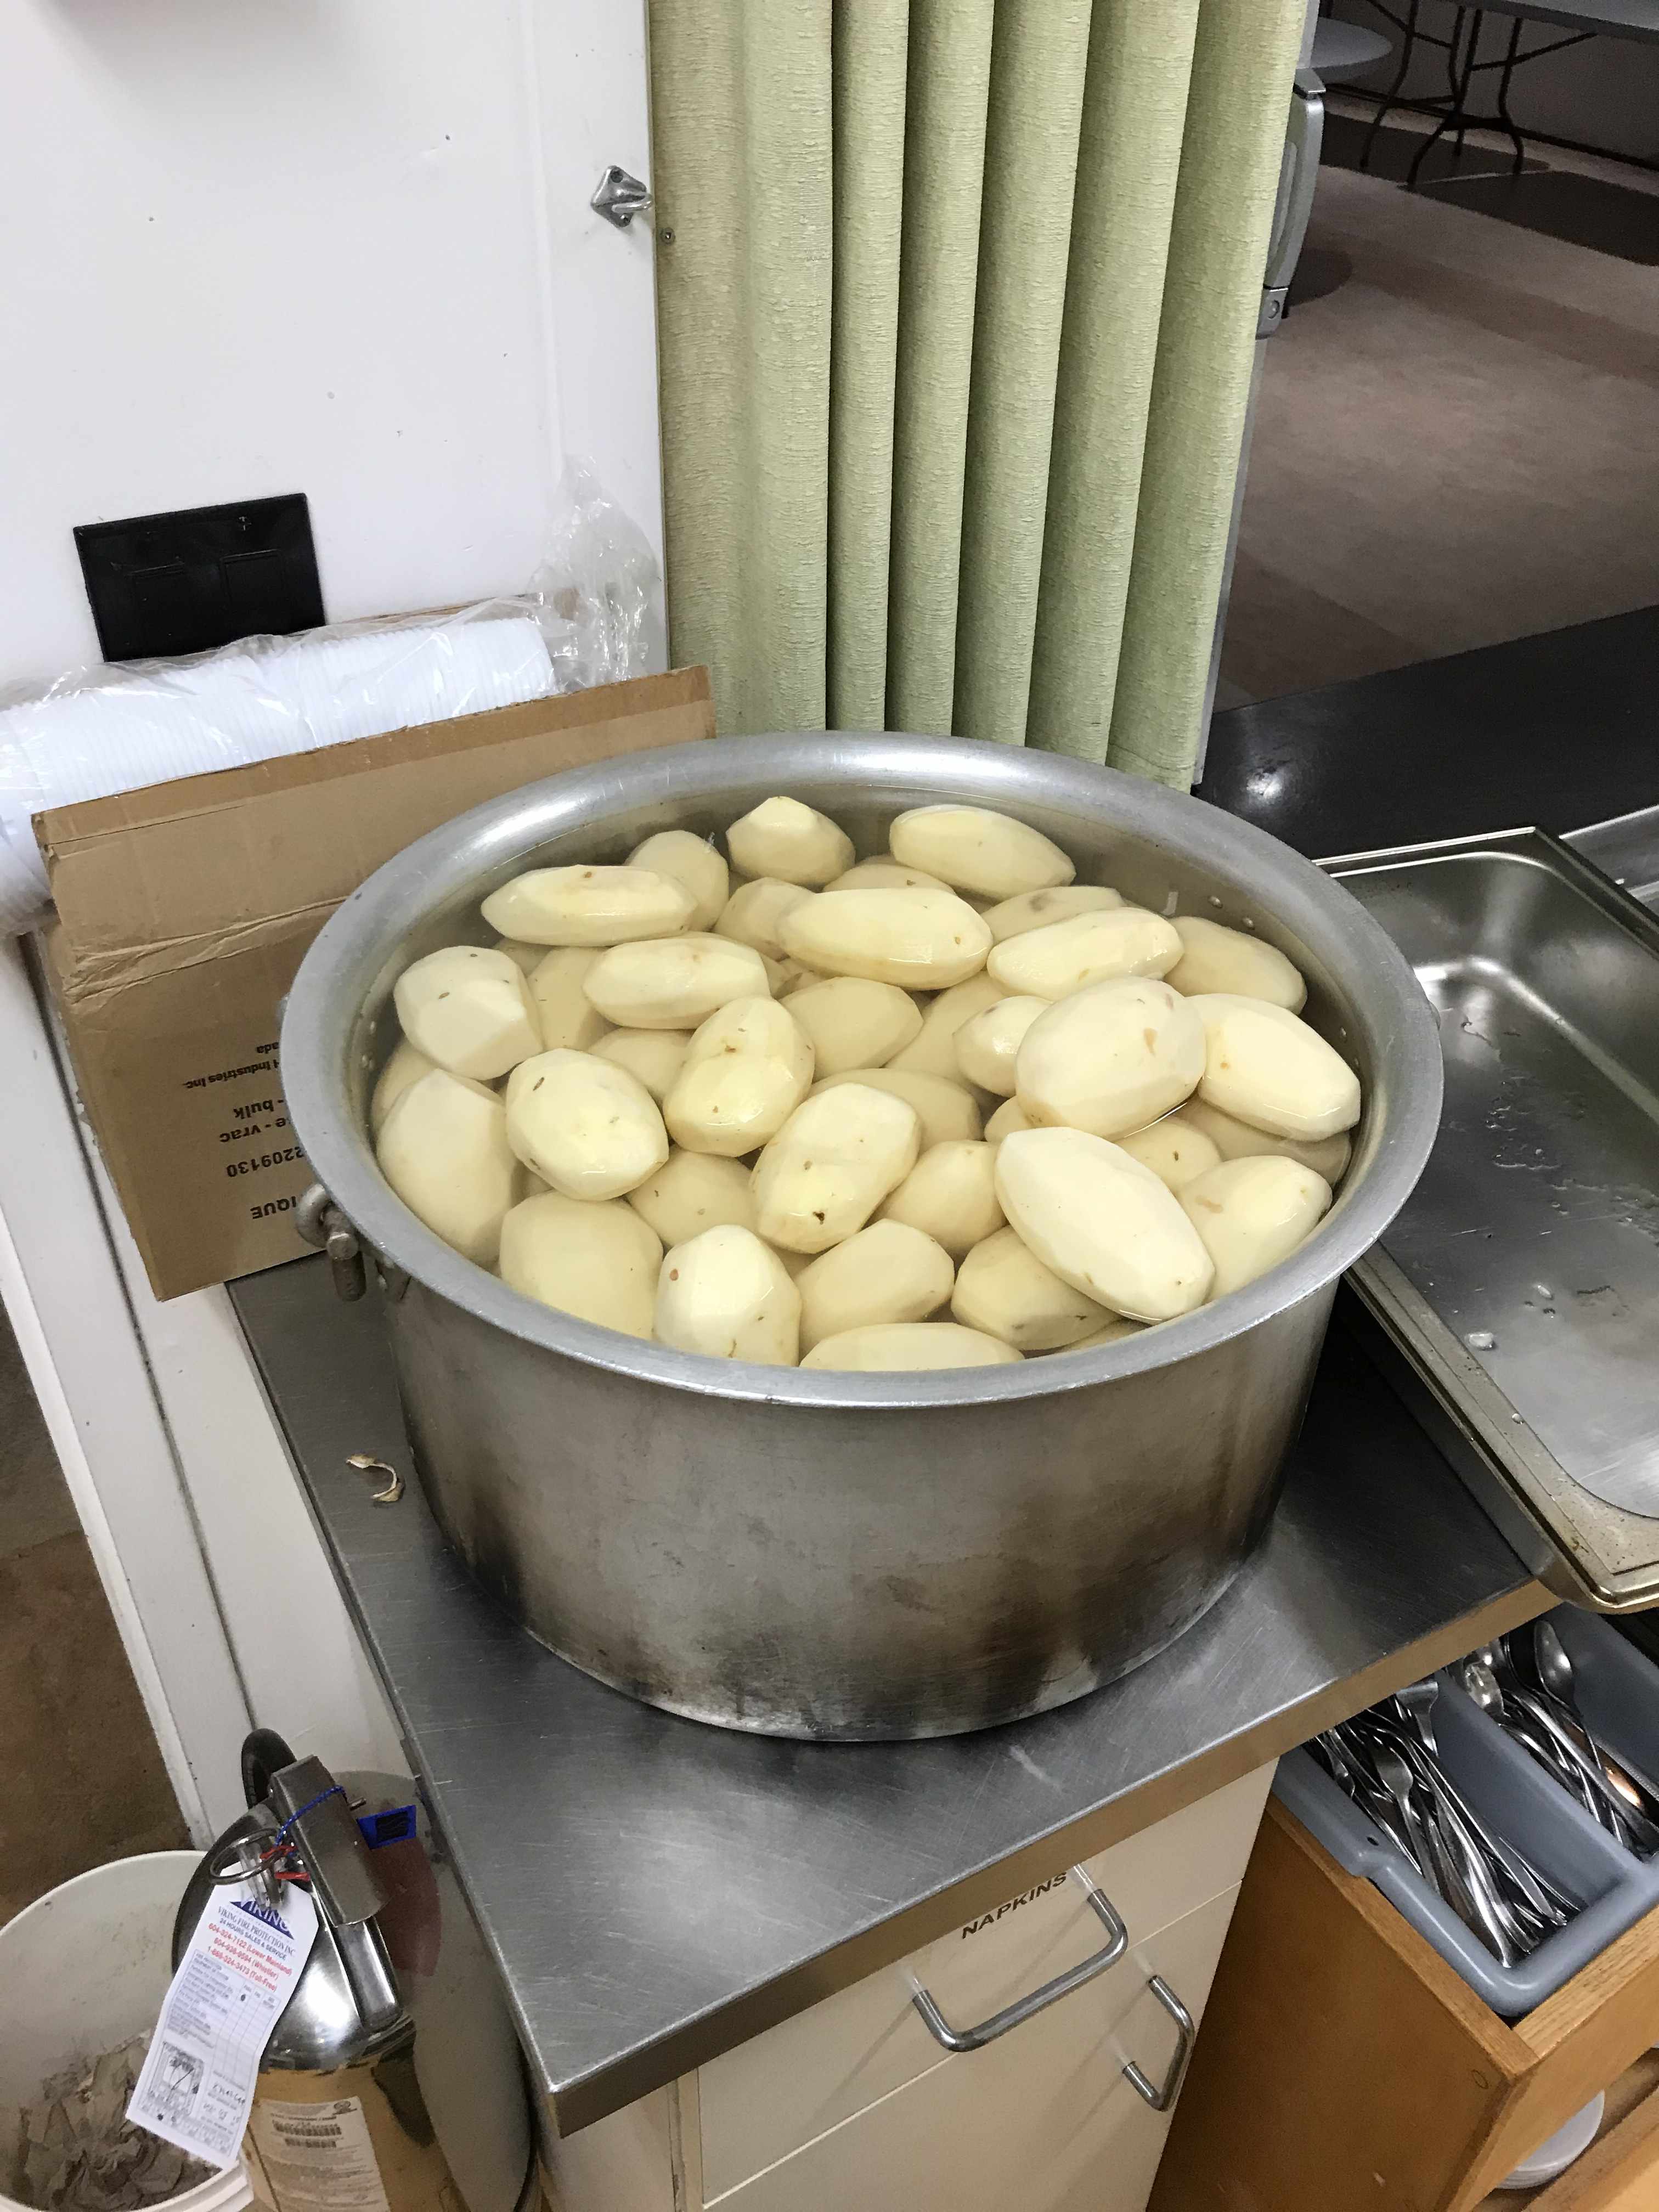 40 litre pot full of peeled potatoes standing on the countertop